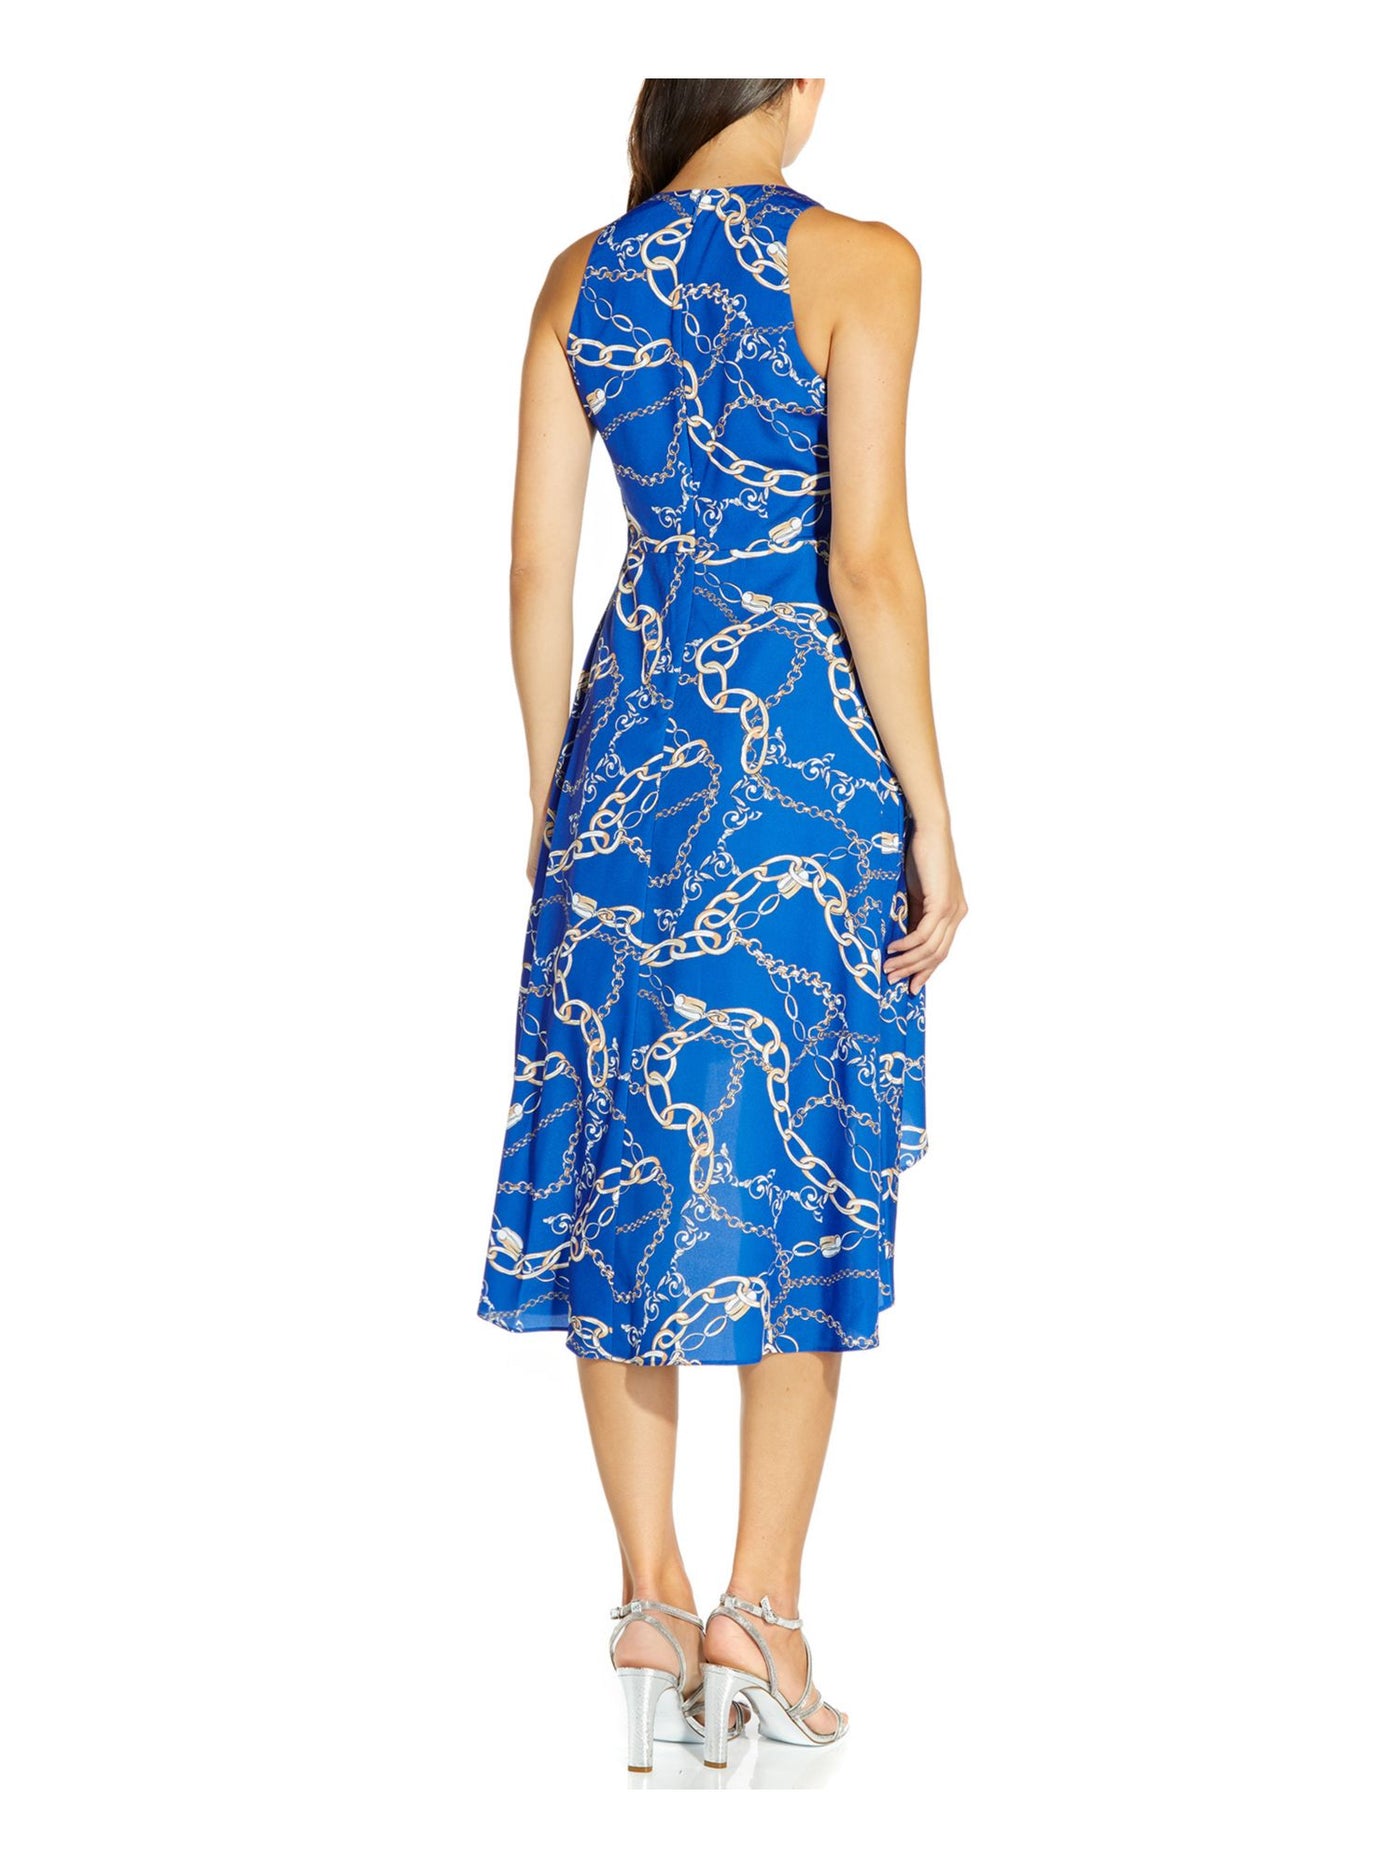 ADRIANNA PAPELL Womens Blue Zippered Hi-low Printed Sleeveless Crew Neck Below The Knee Party Fit + Flare Dress 4